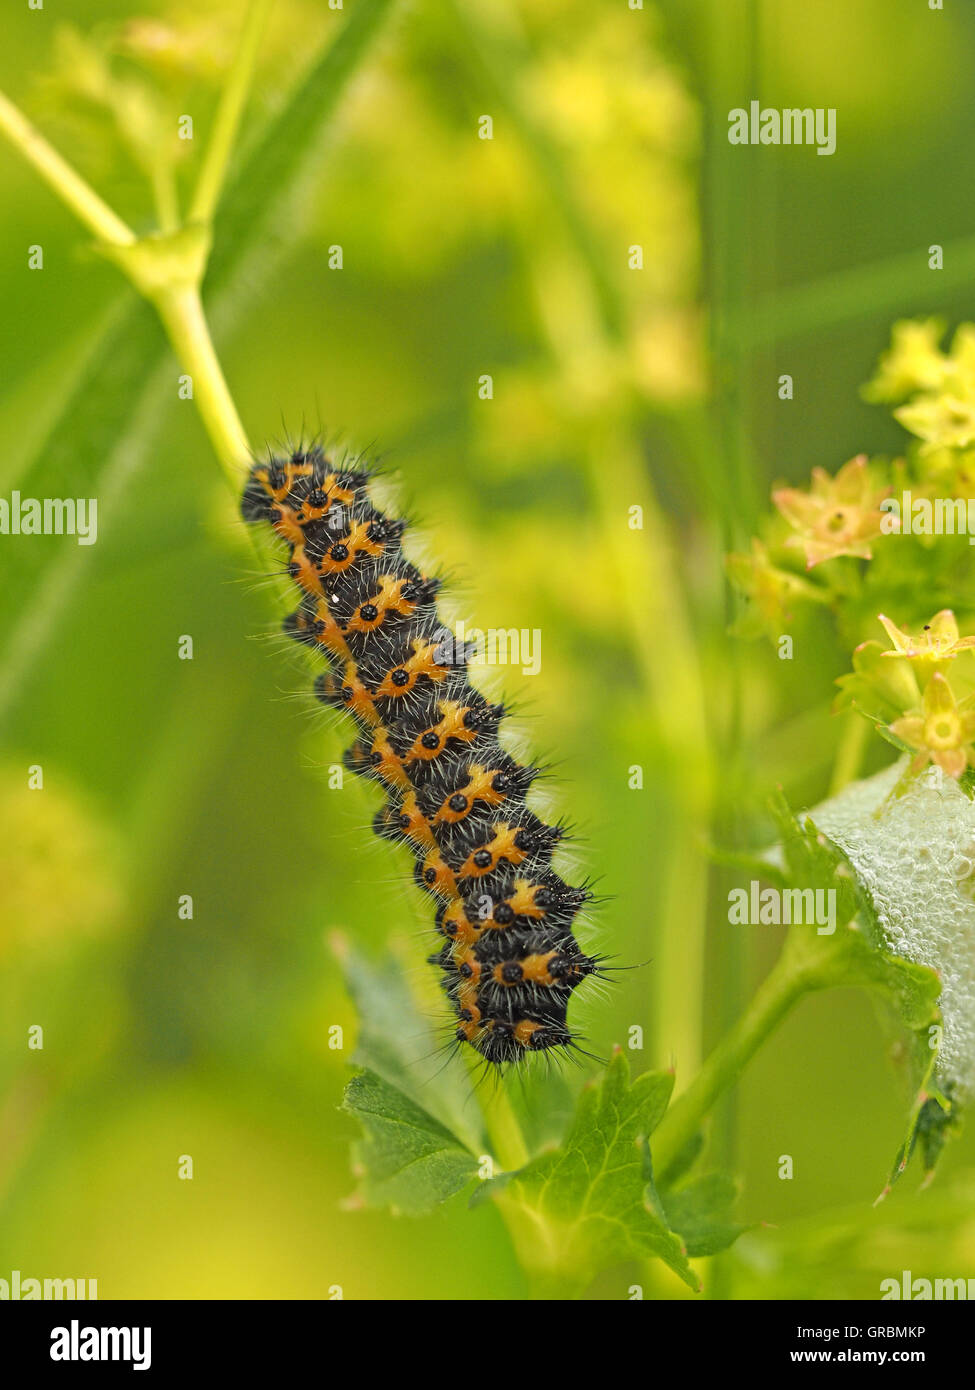 Early instar larva or caterpillar of emperor moth (Saturnia pavonia) feeding on Lady's Bedstraw (Galium verum) with cuckoo spit Stock Photo